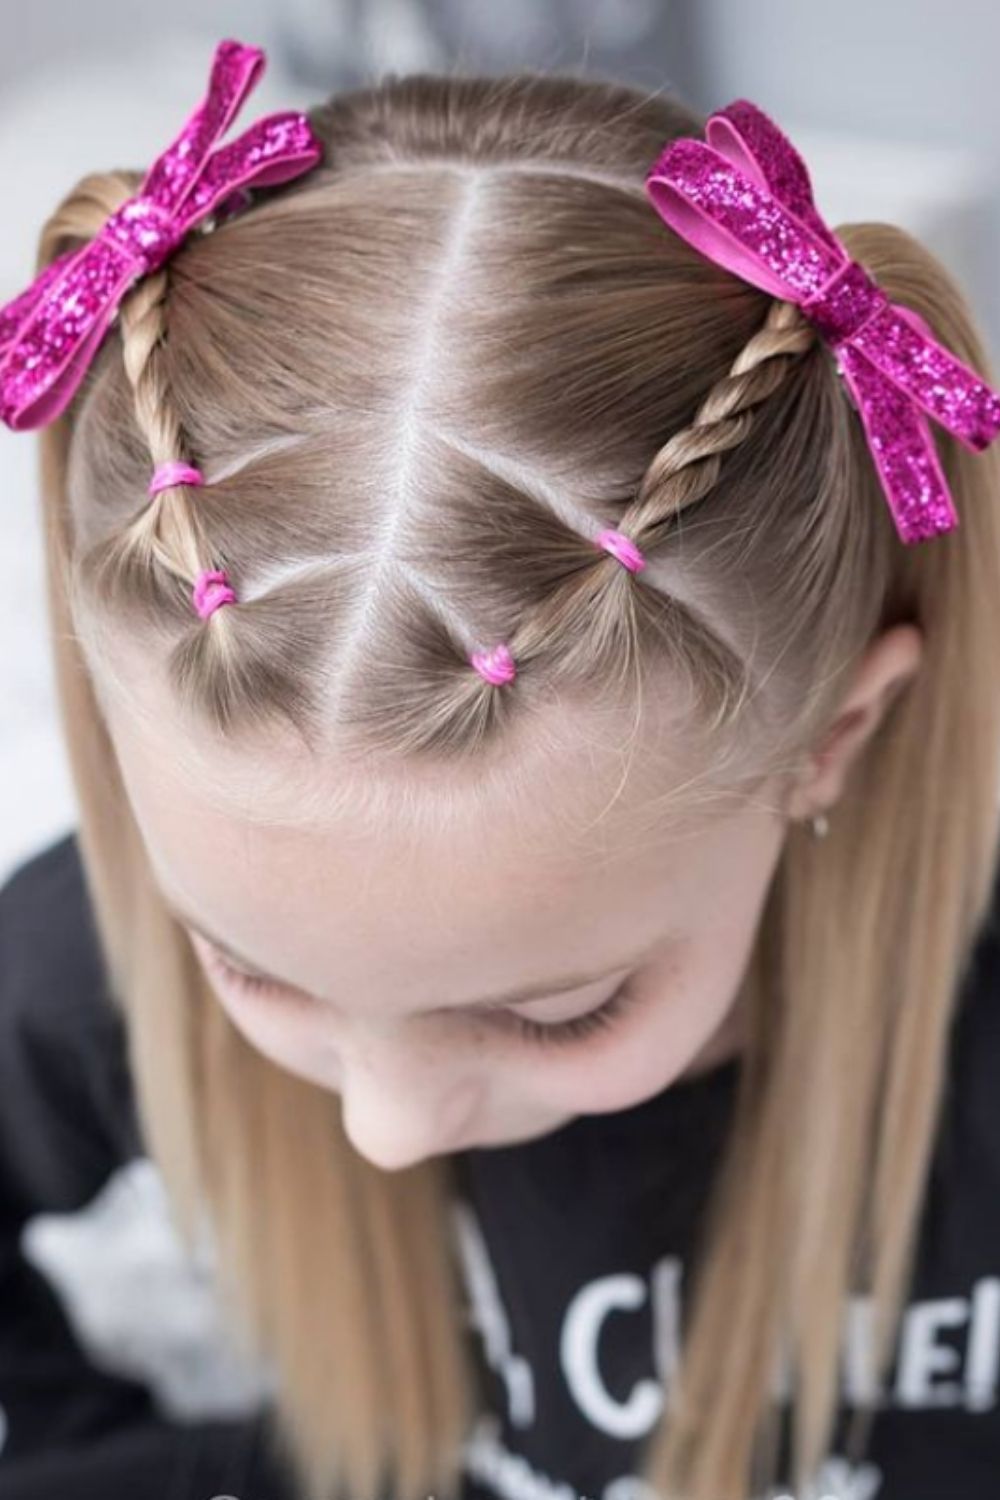 Cutest Braid Hairstyles ideas for Little Girls At the Christmas party